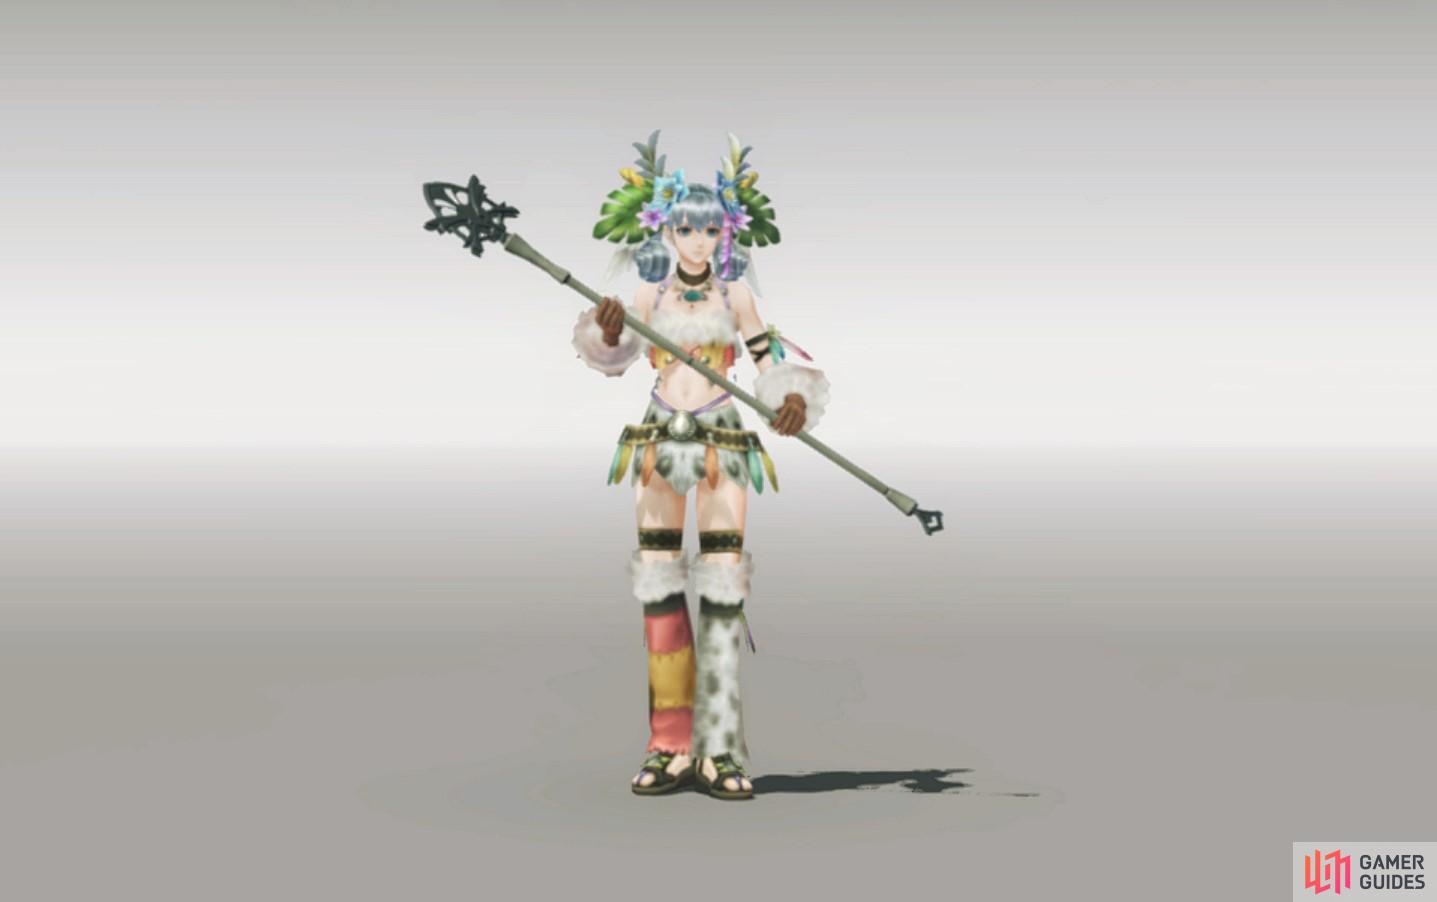 Melia is modelling the Hierax armour set.